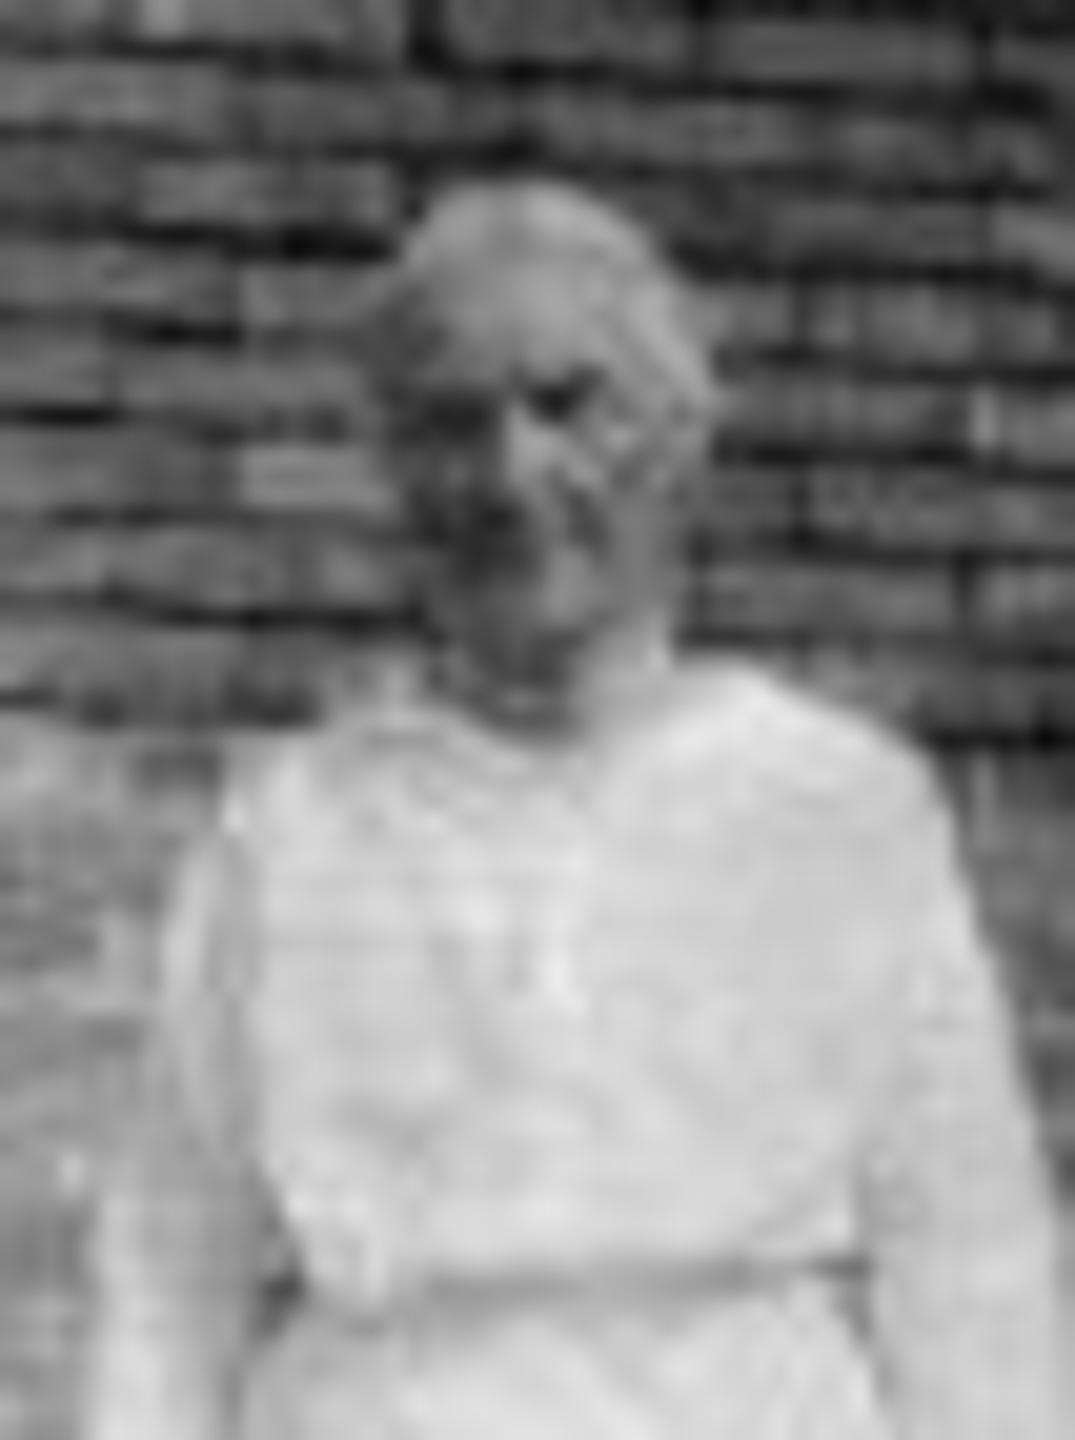 Mary Ann Staker (1848 - 1929) Profile